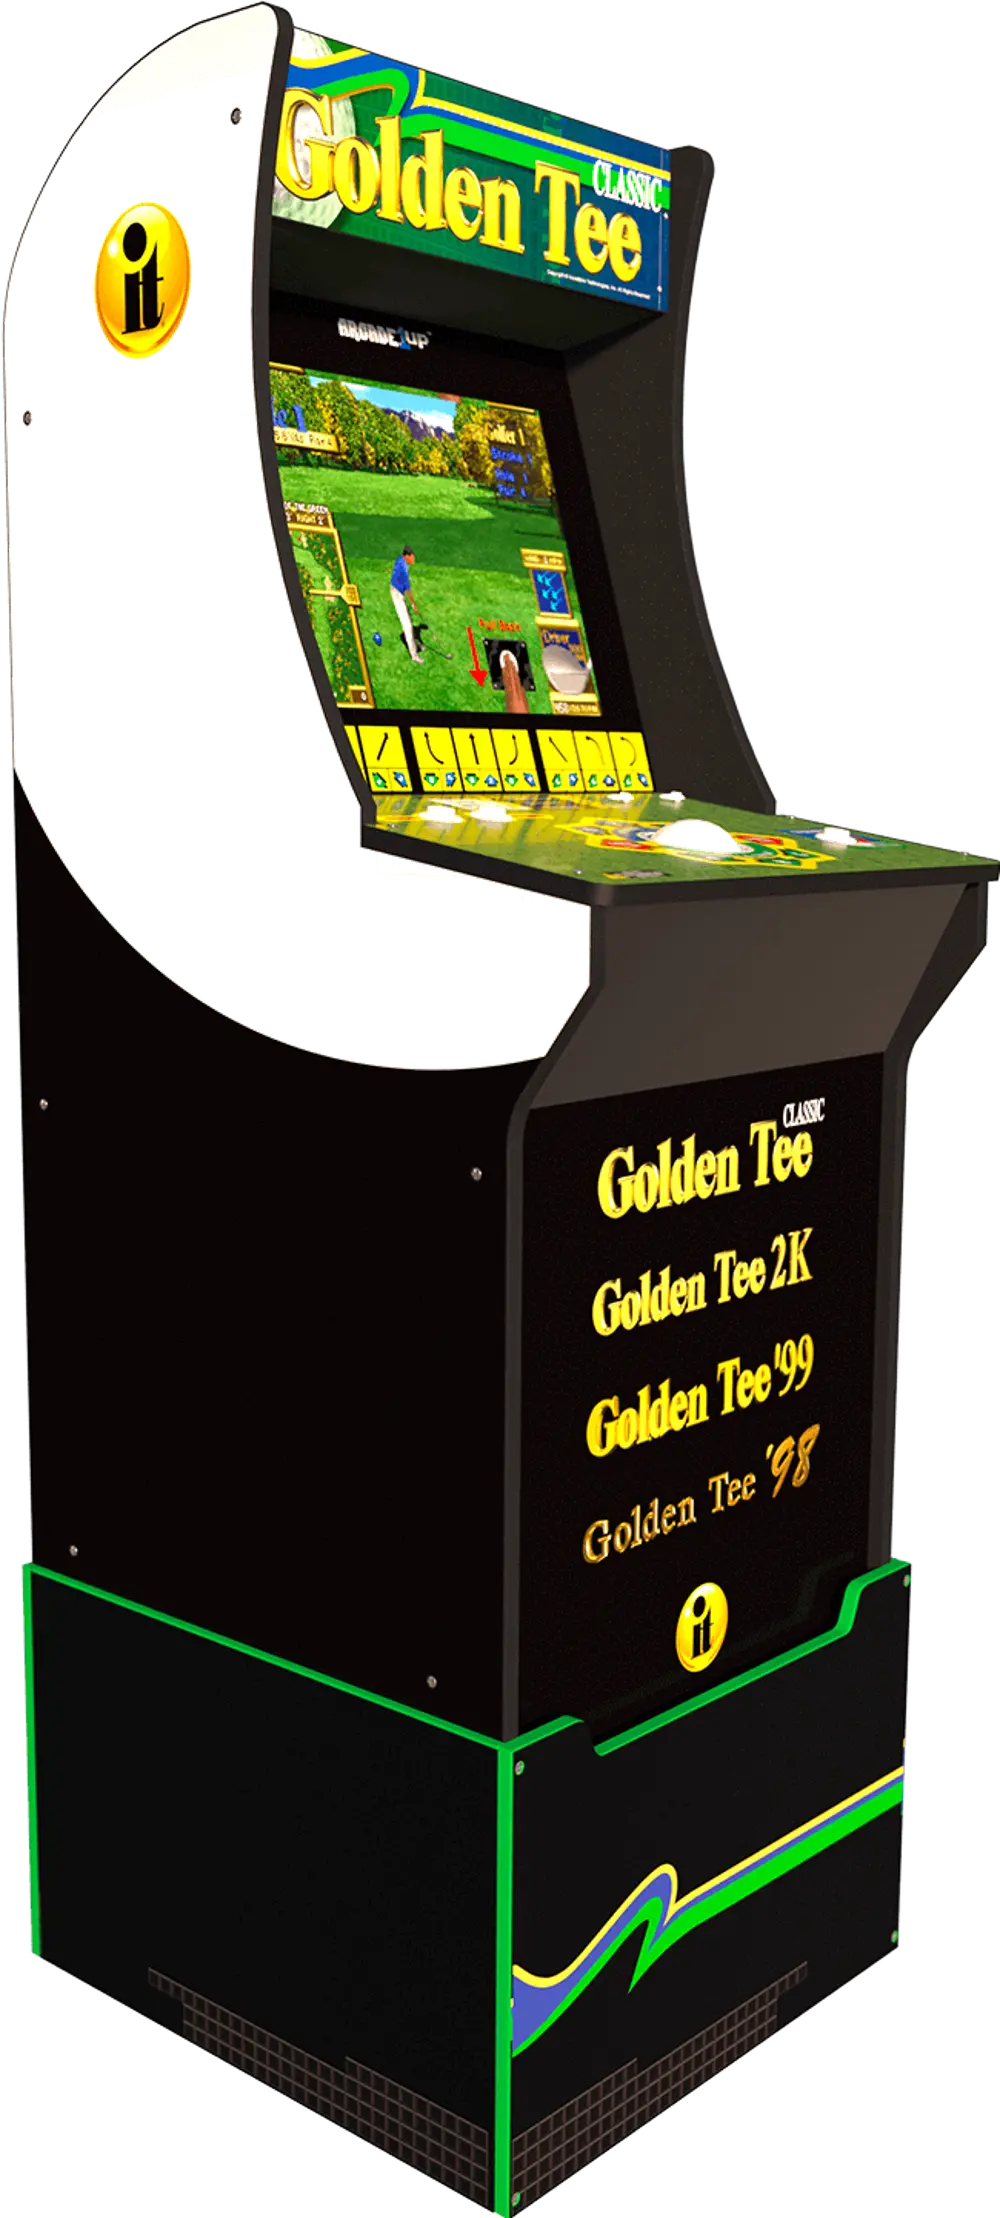 ARCADE1UP/GOLDEN_TEE Arcade 1UP Golden Tee Arcade Cabinet with Riser-1